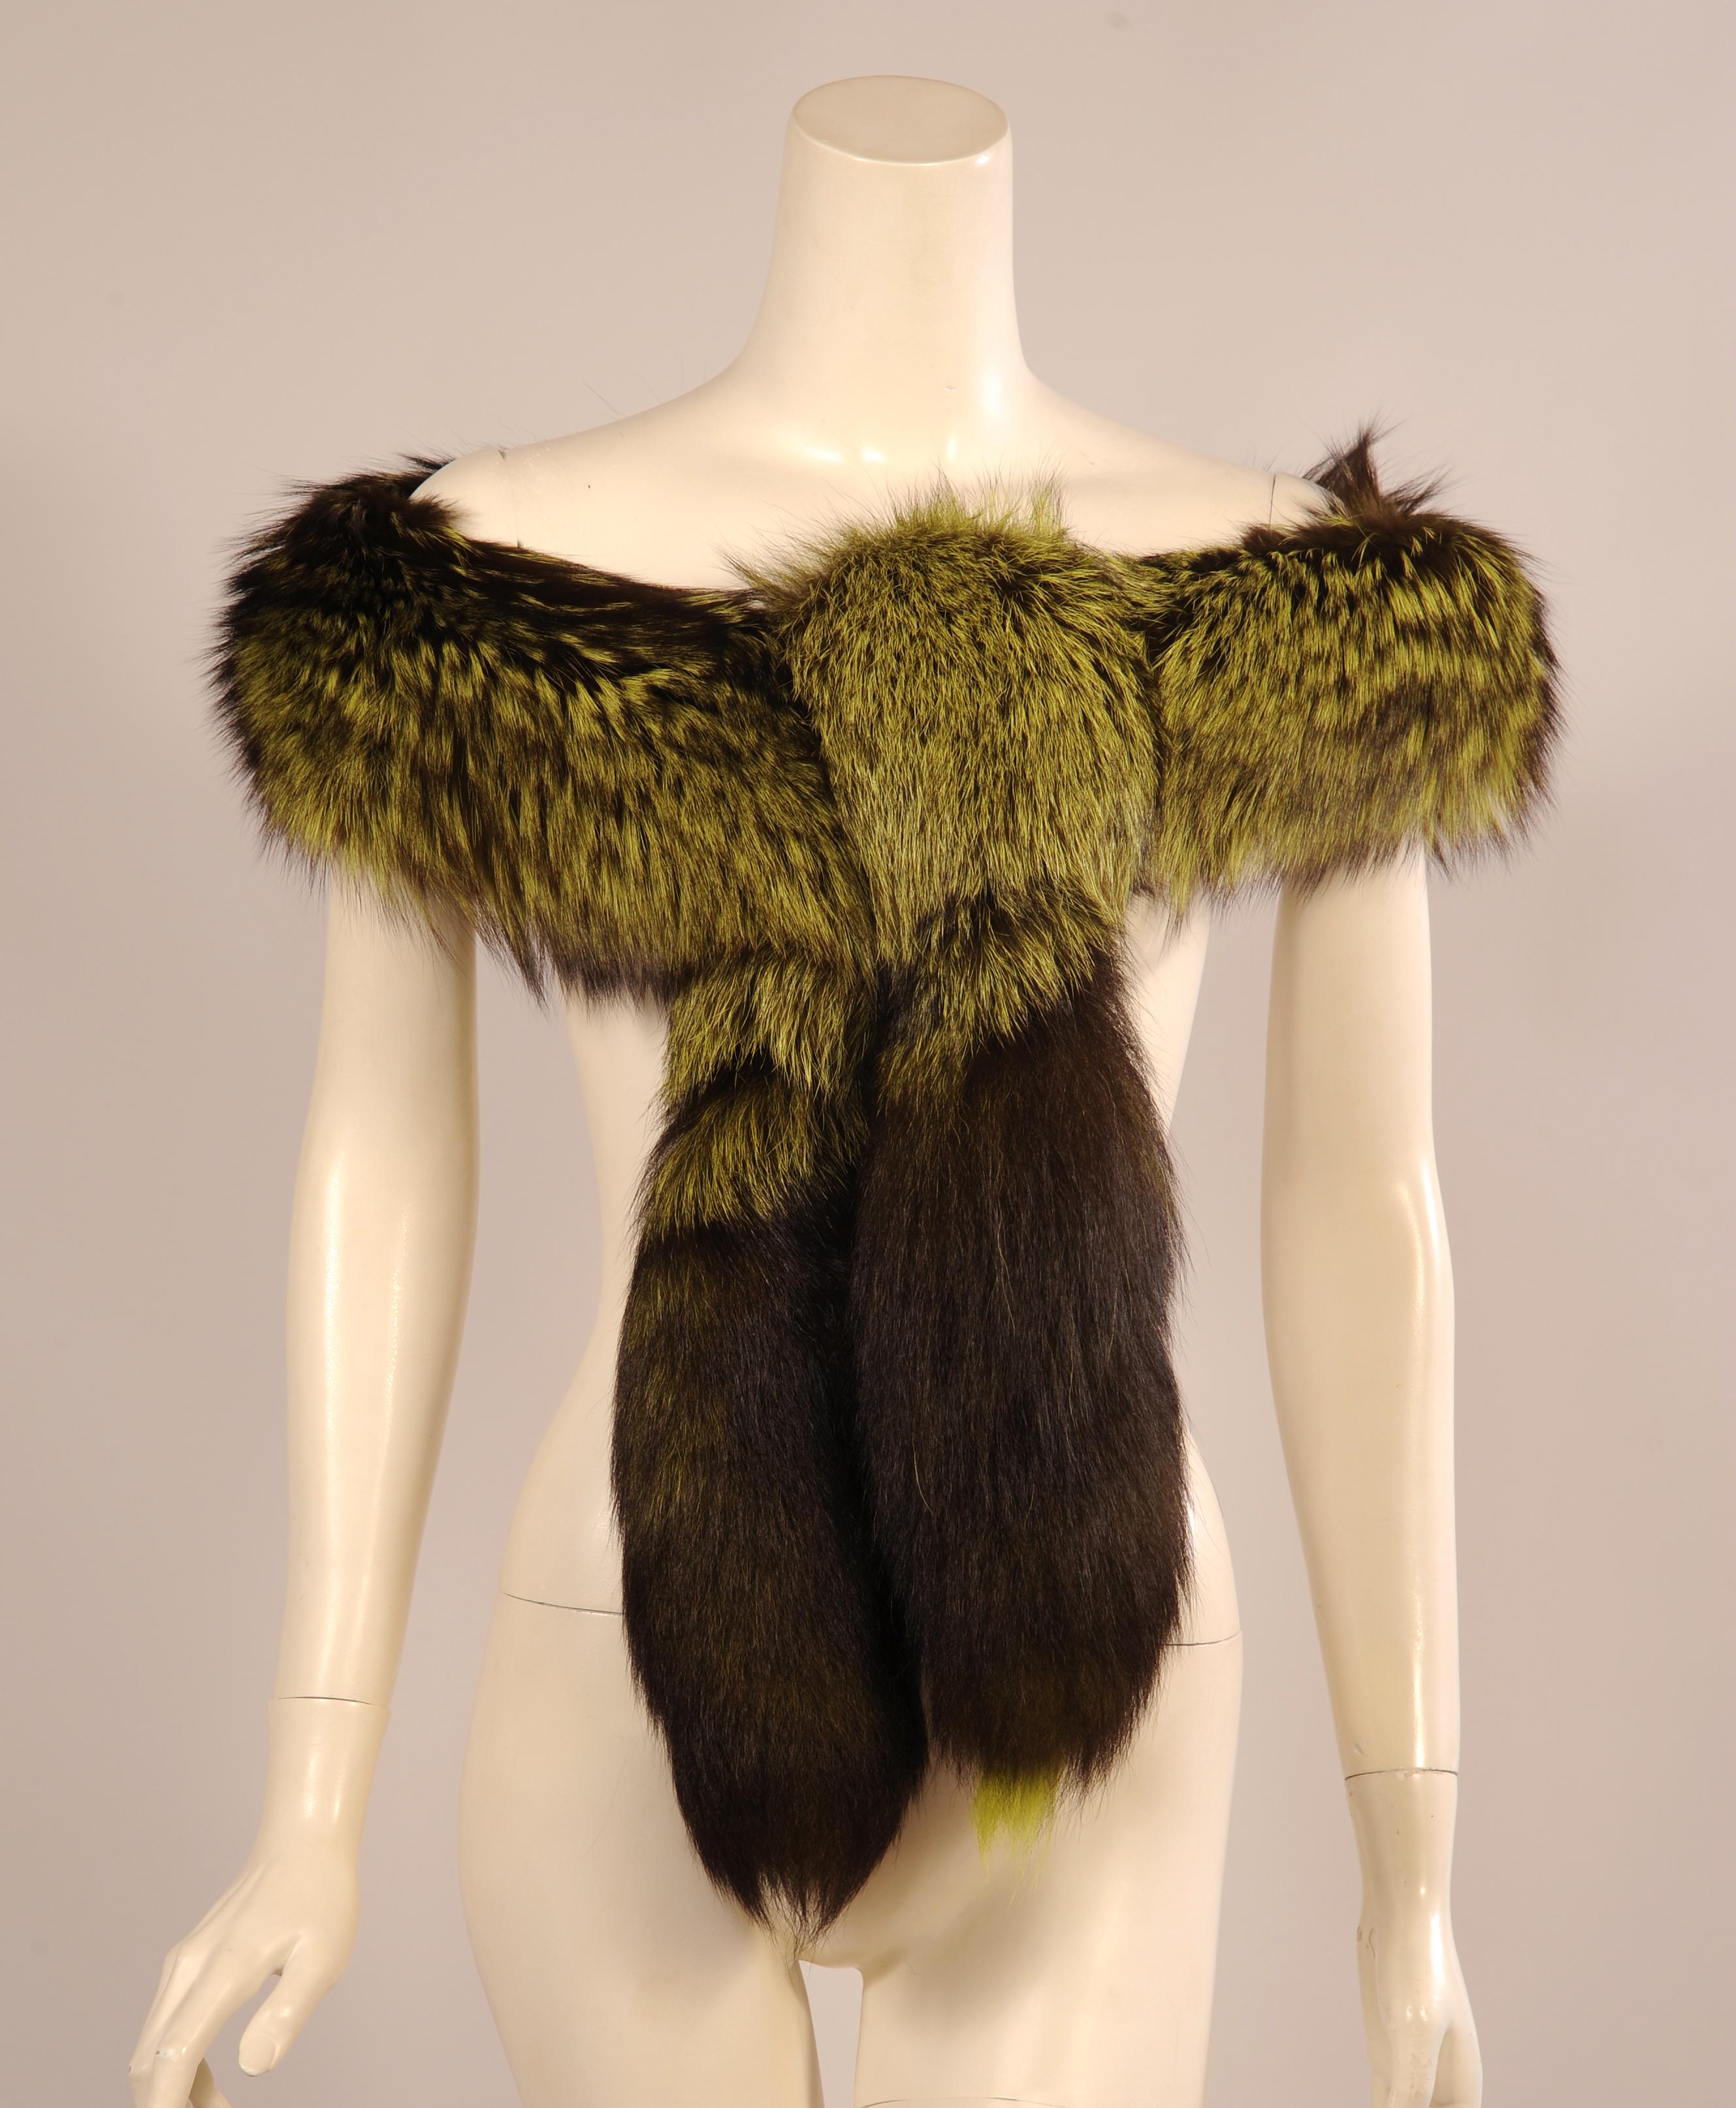 Bright green dyed fox stands out against the darker background making this Birger Christensen stole a very dramatic fur wrap. It is lined with black velvet and both ends are finished with a fox tail. It is in excellent